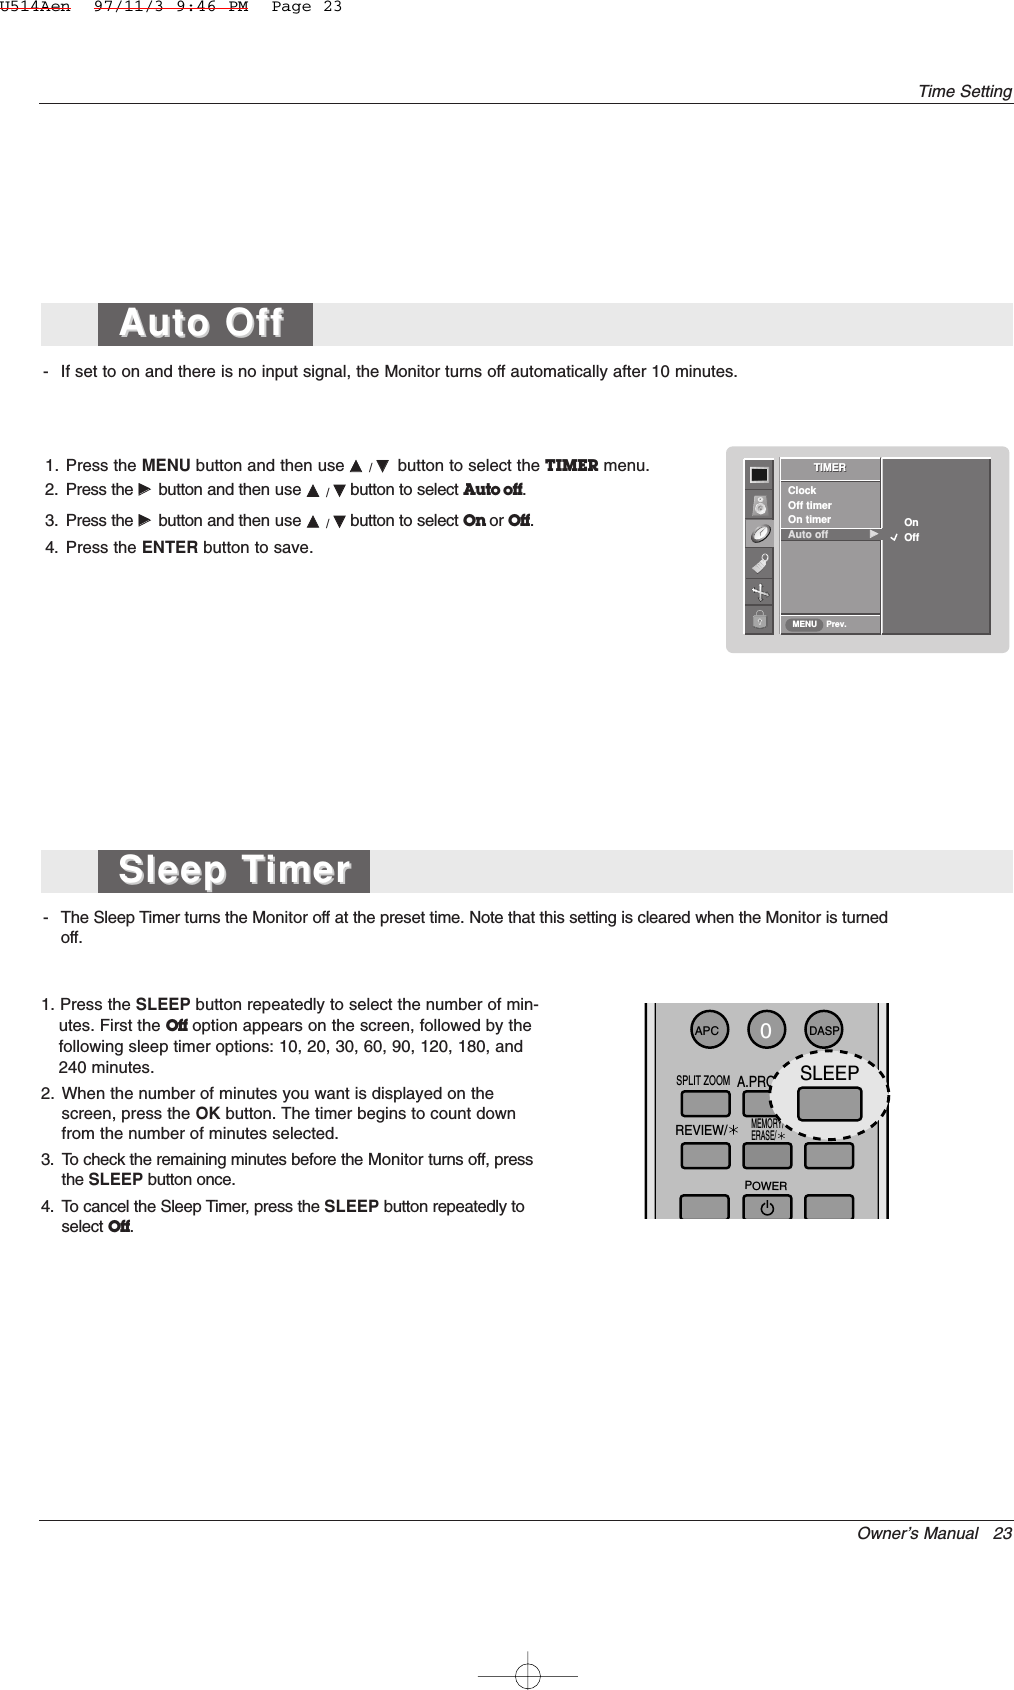 Owner’s Manual   23Time Setting- If set to on and there is no input signal, the Monitor turns off automatically after 10 minutes.1. Press the MENU button and then use DD  / EEbutton to select the TIMER menu.2. Press the GGbutton and then use DD  / EEbutton to select Auto off.3. Press the GGbutton and then use DD  / EEbutton to select On or Off.4. Press the ENTER button to save.- The Sleep Timer turns the Monitor off at the preset time. Note that this setting is cleared when the Monitor is turnedoff.1. Press the SLEEP button repeatedly to select the number of min-utes. First the Off option appears on the screen, followed by thefollowing sleep timer options: 10, 20, 30, 60, 90, 120, 180, and240 minutes.2. When the number of minutes you want is displayed on thescreen, press the OK button. The timer begins to count downfrom the number of minutes selected.3. To check the remaining minutes before the Monitor turns off, pressthe SLEEP button once.4. To cancel the Sleep Timer, press the SLEEP button repeatedly toselect Off.TIMERPrev.ClockOff timerOn timerAuto off             GGTIMERMENUOn            OffSleep TSleep TimerimerAuto Off Auto Off 0APCDASPSPLIT ZOOMSLEEPMEMORY/ERASE/REVIEW/FCR/A.PROG/POWERSLEEPU514Aen  97/11/3 9:46 PM  Page 23